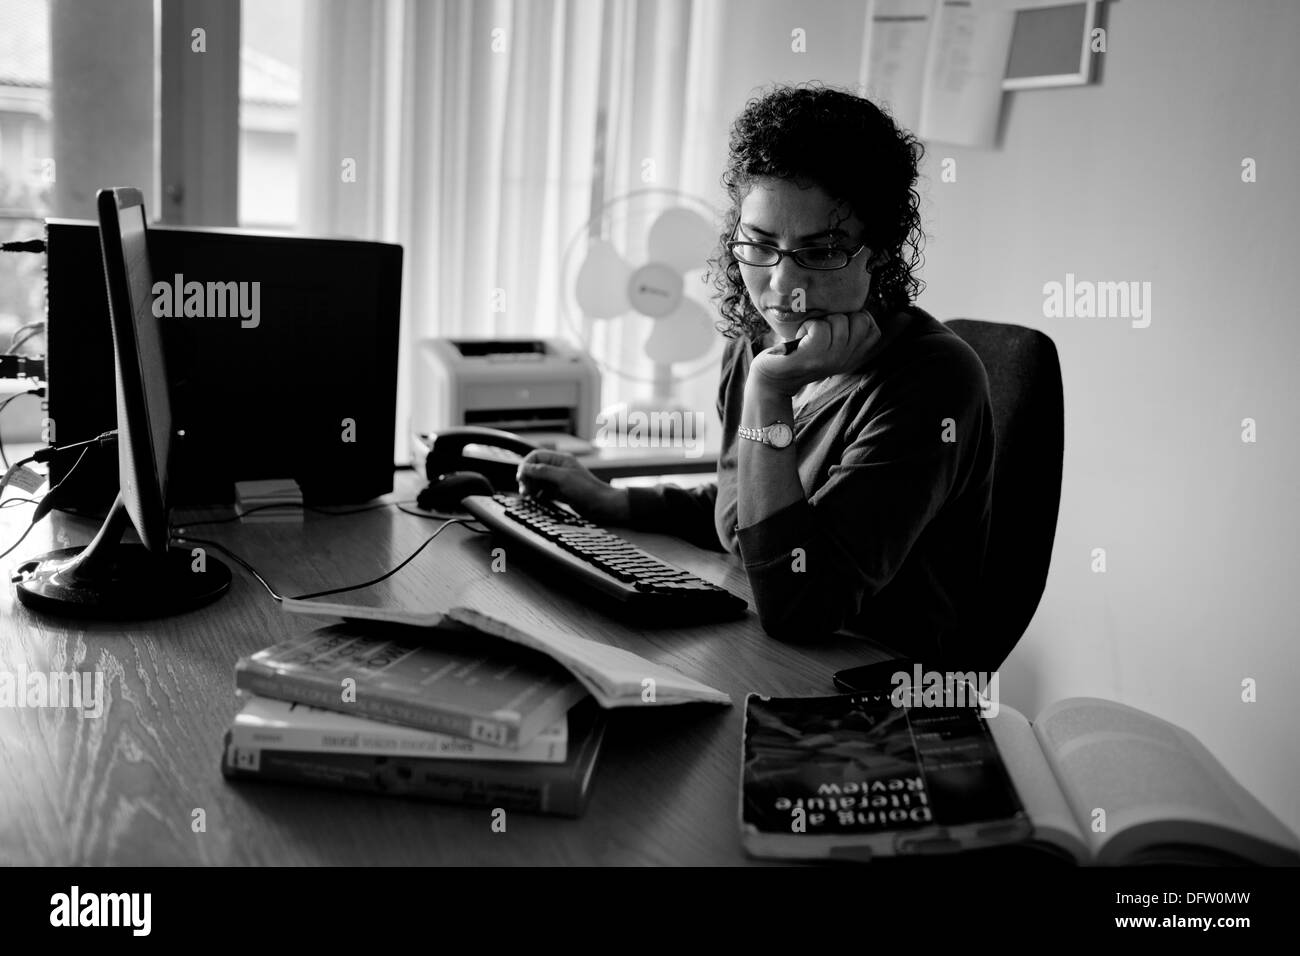 Nicole, postgraduate student works on an assignment in her office. Stock Photo